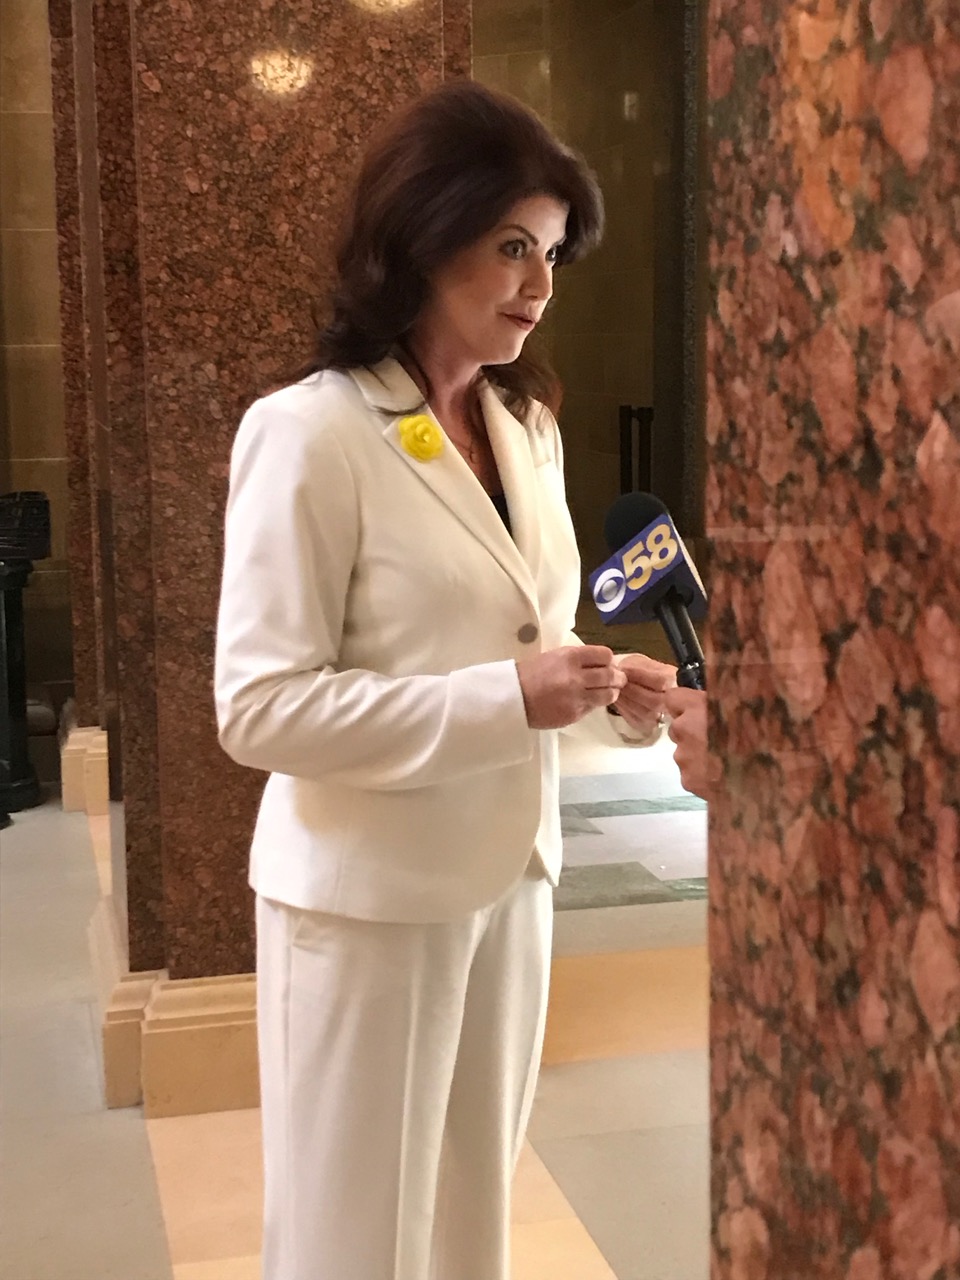  Former Wisconsin Lieutenant Governor Rebecca Kleefisch is executive director of the U.S. Women's Suffrage Centennial Commission. She was a featured speaker at the event. 